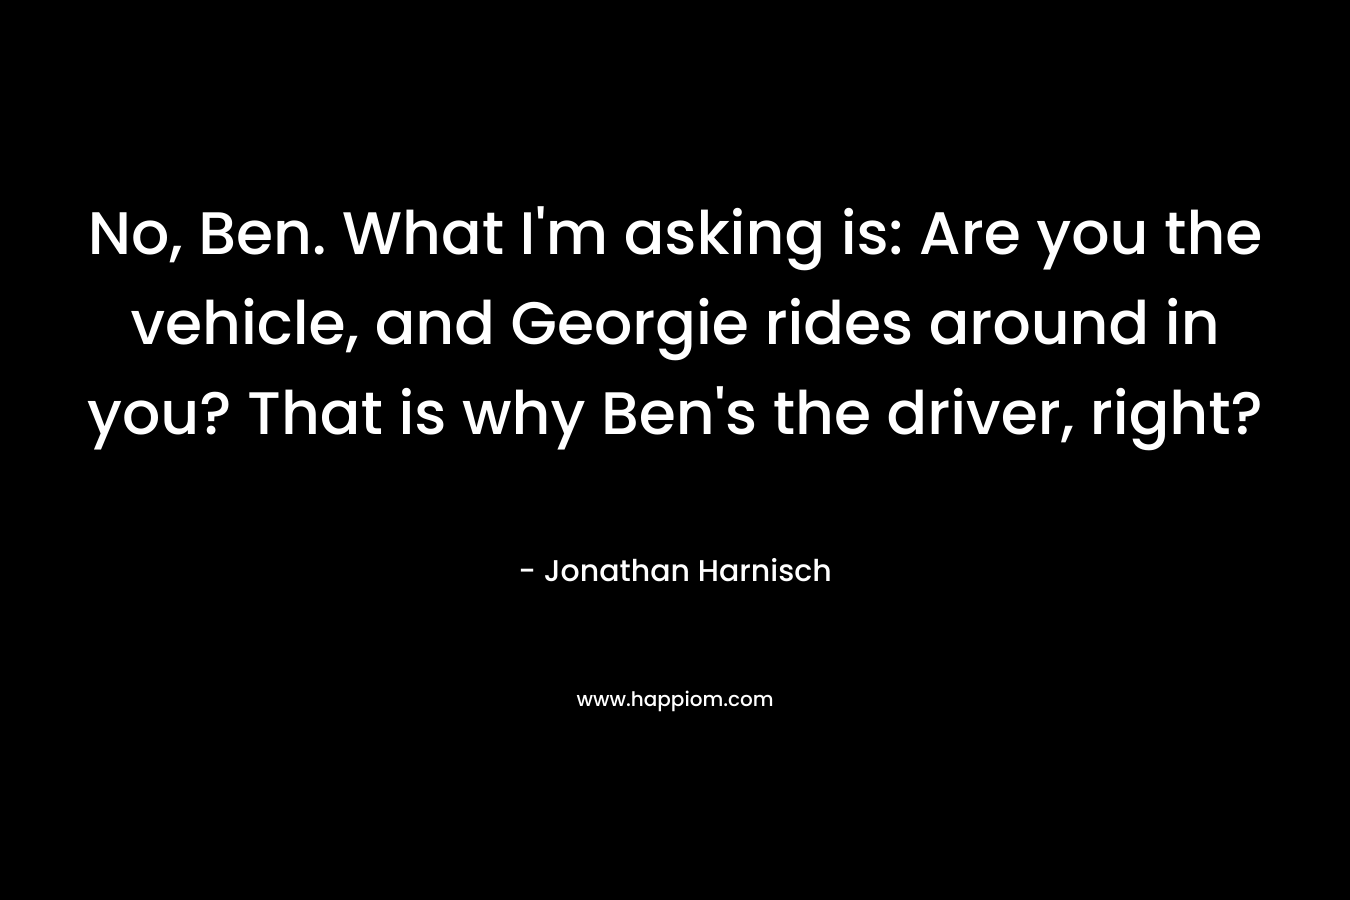 No, Ben. What I'm asking is: Are you the vehicle, and Georgie rides around in you? That is why Ben's the driver, right?